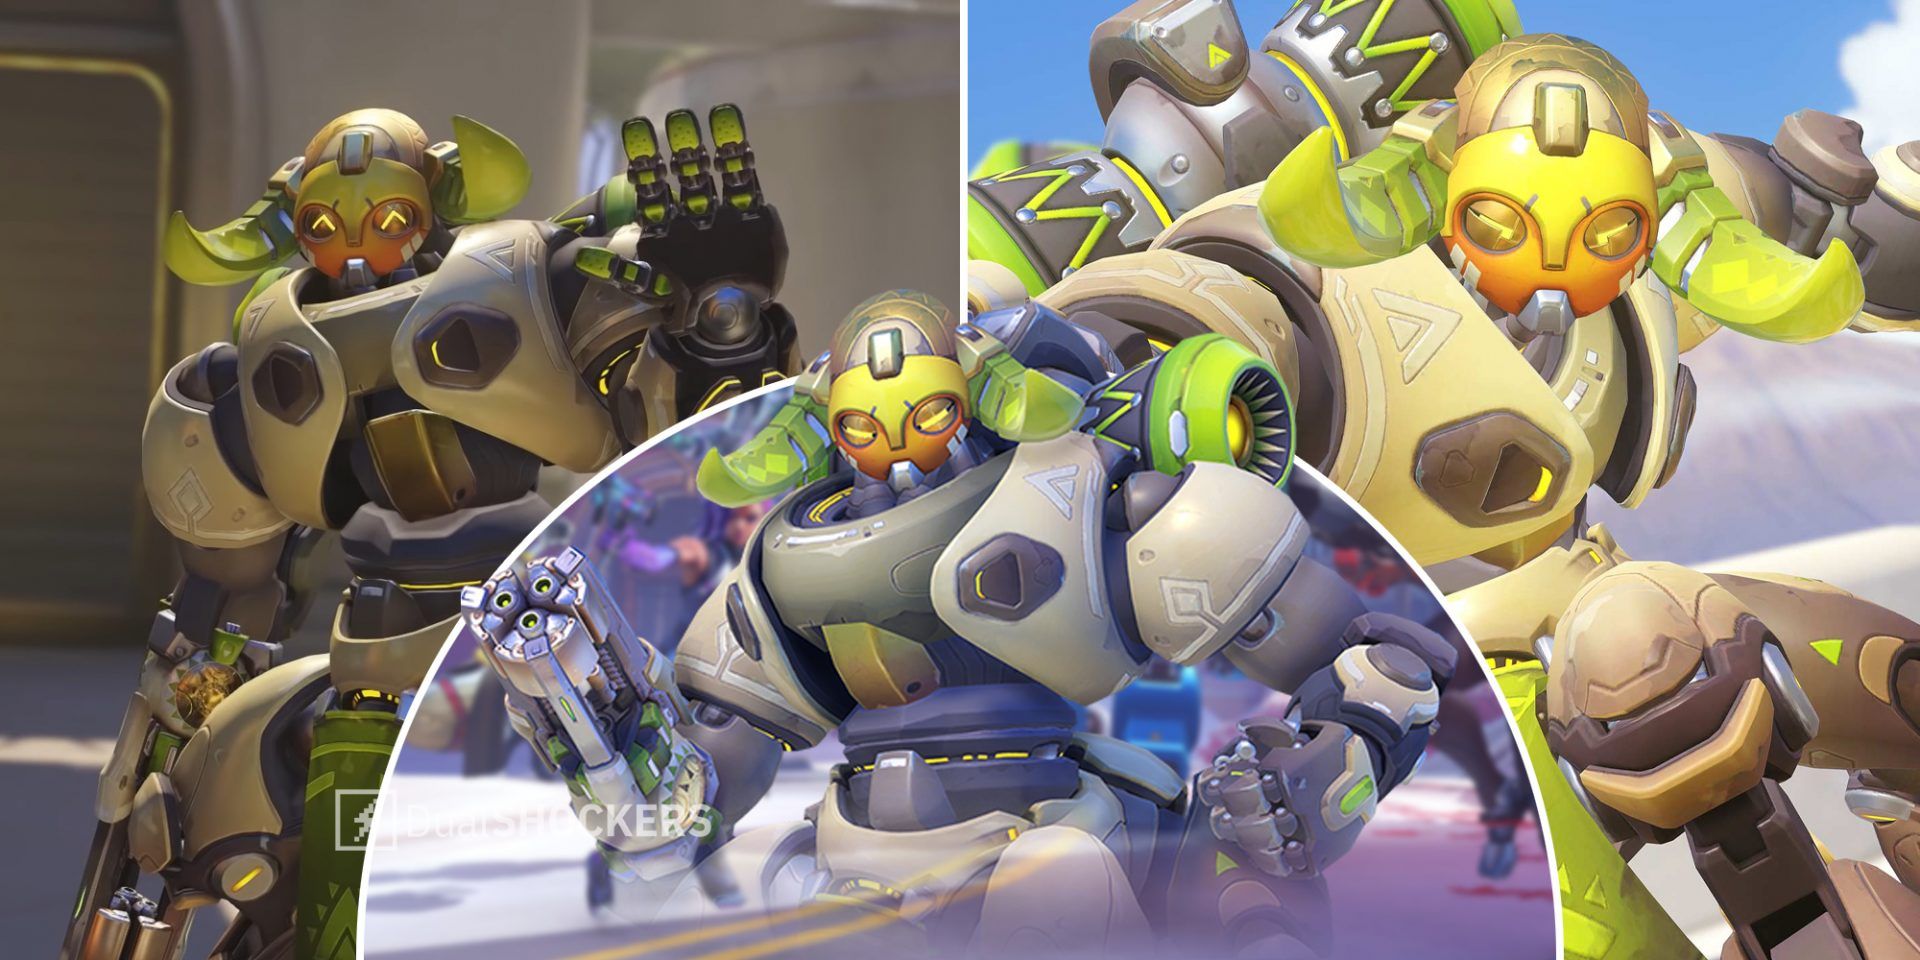 Overwatch Orisa waving on left, Orisa promo image in middle, Orisa attacking on right